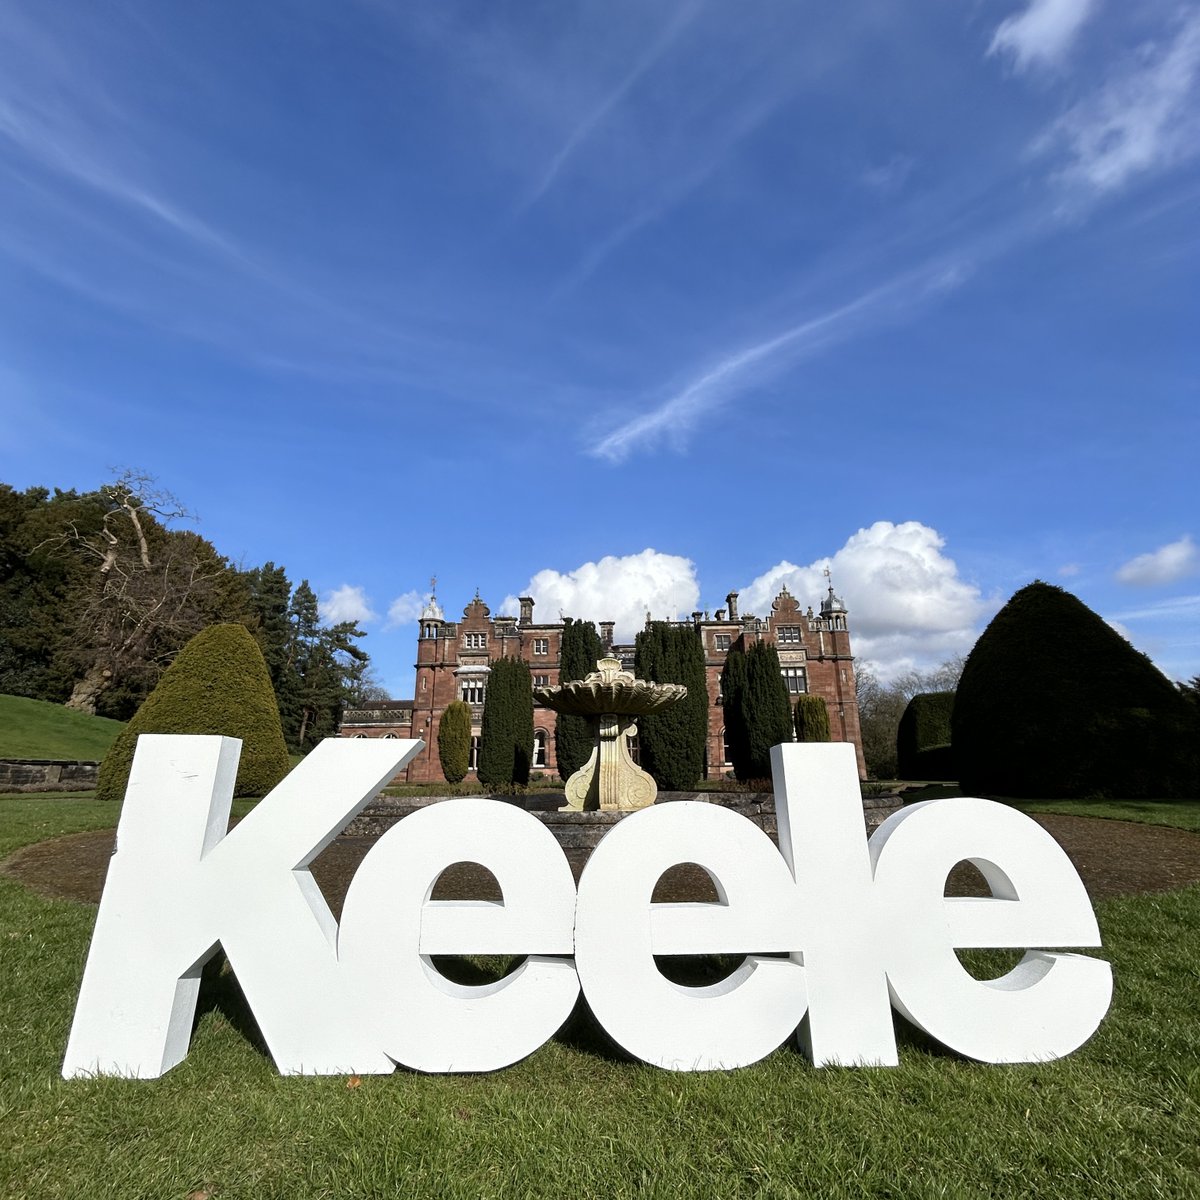 Who's been loving these warmer temperatures lately? It's nearly chilling on the lawns season ☀️ #LoveKeele